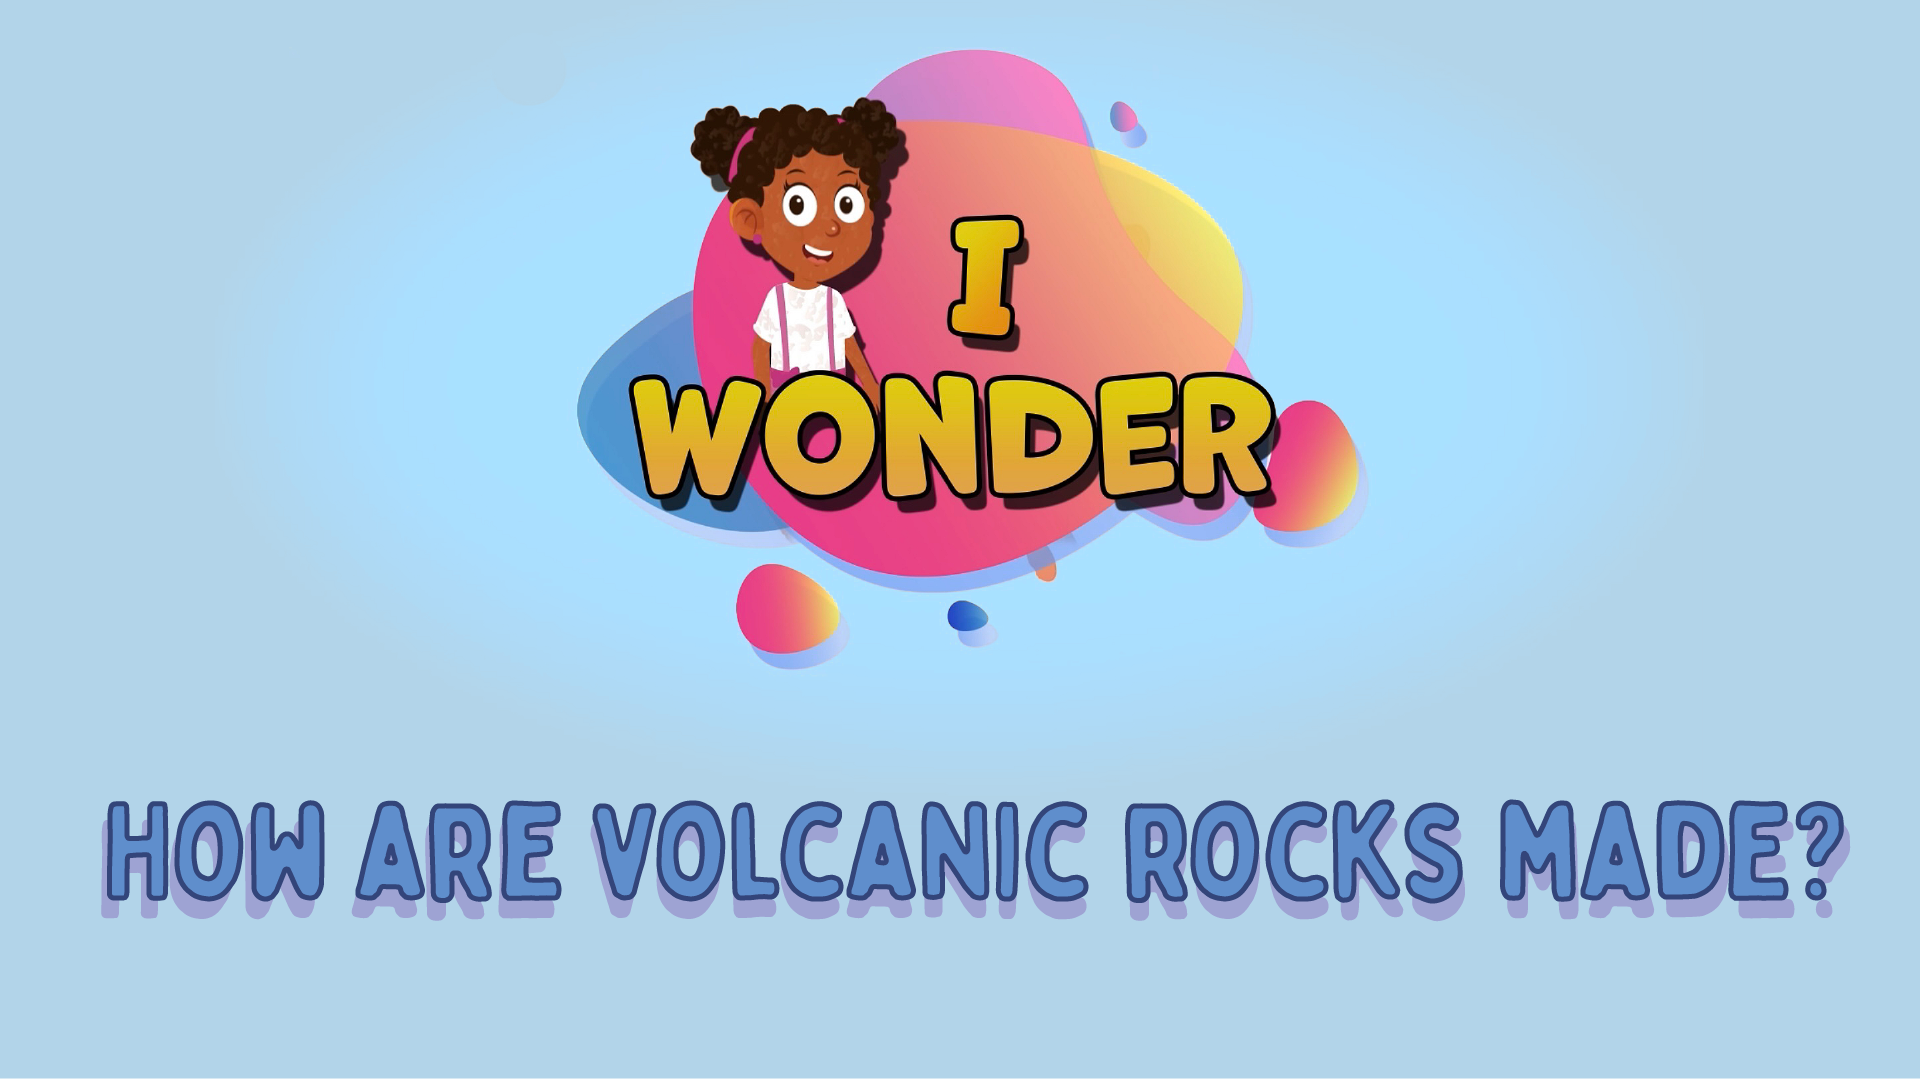 How Are Volcanic Rocks Made?